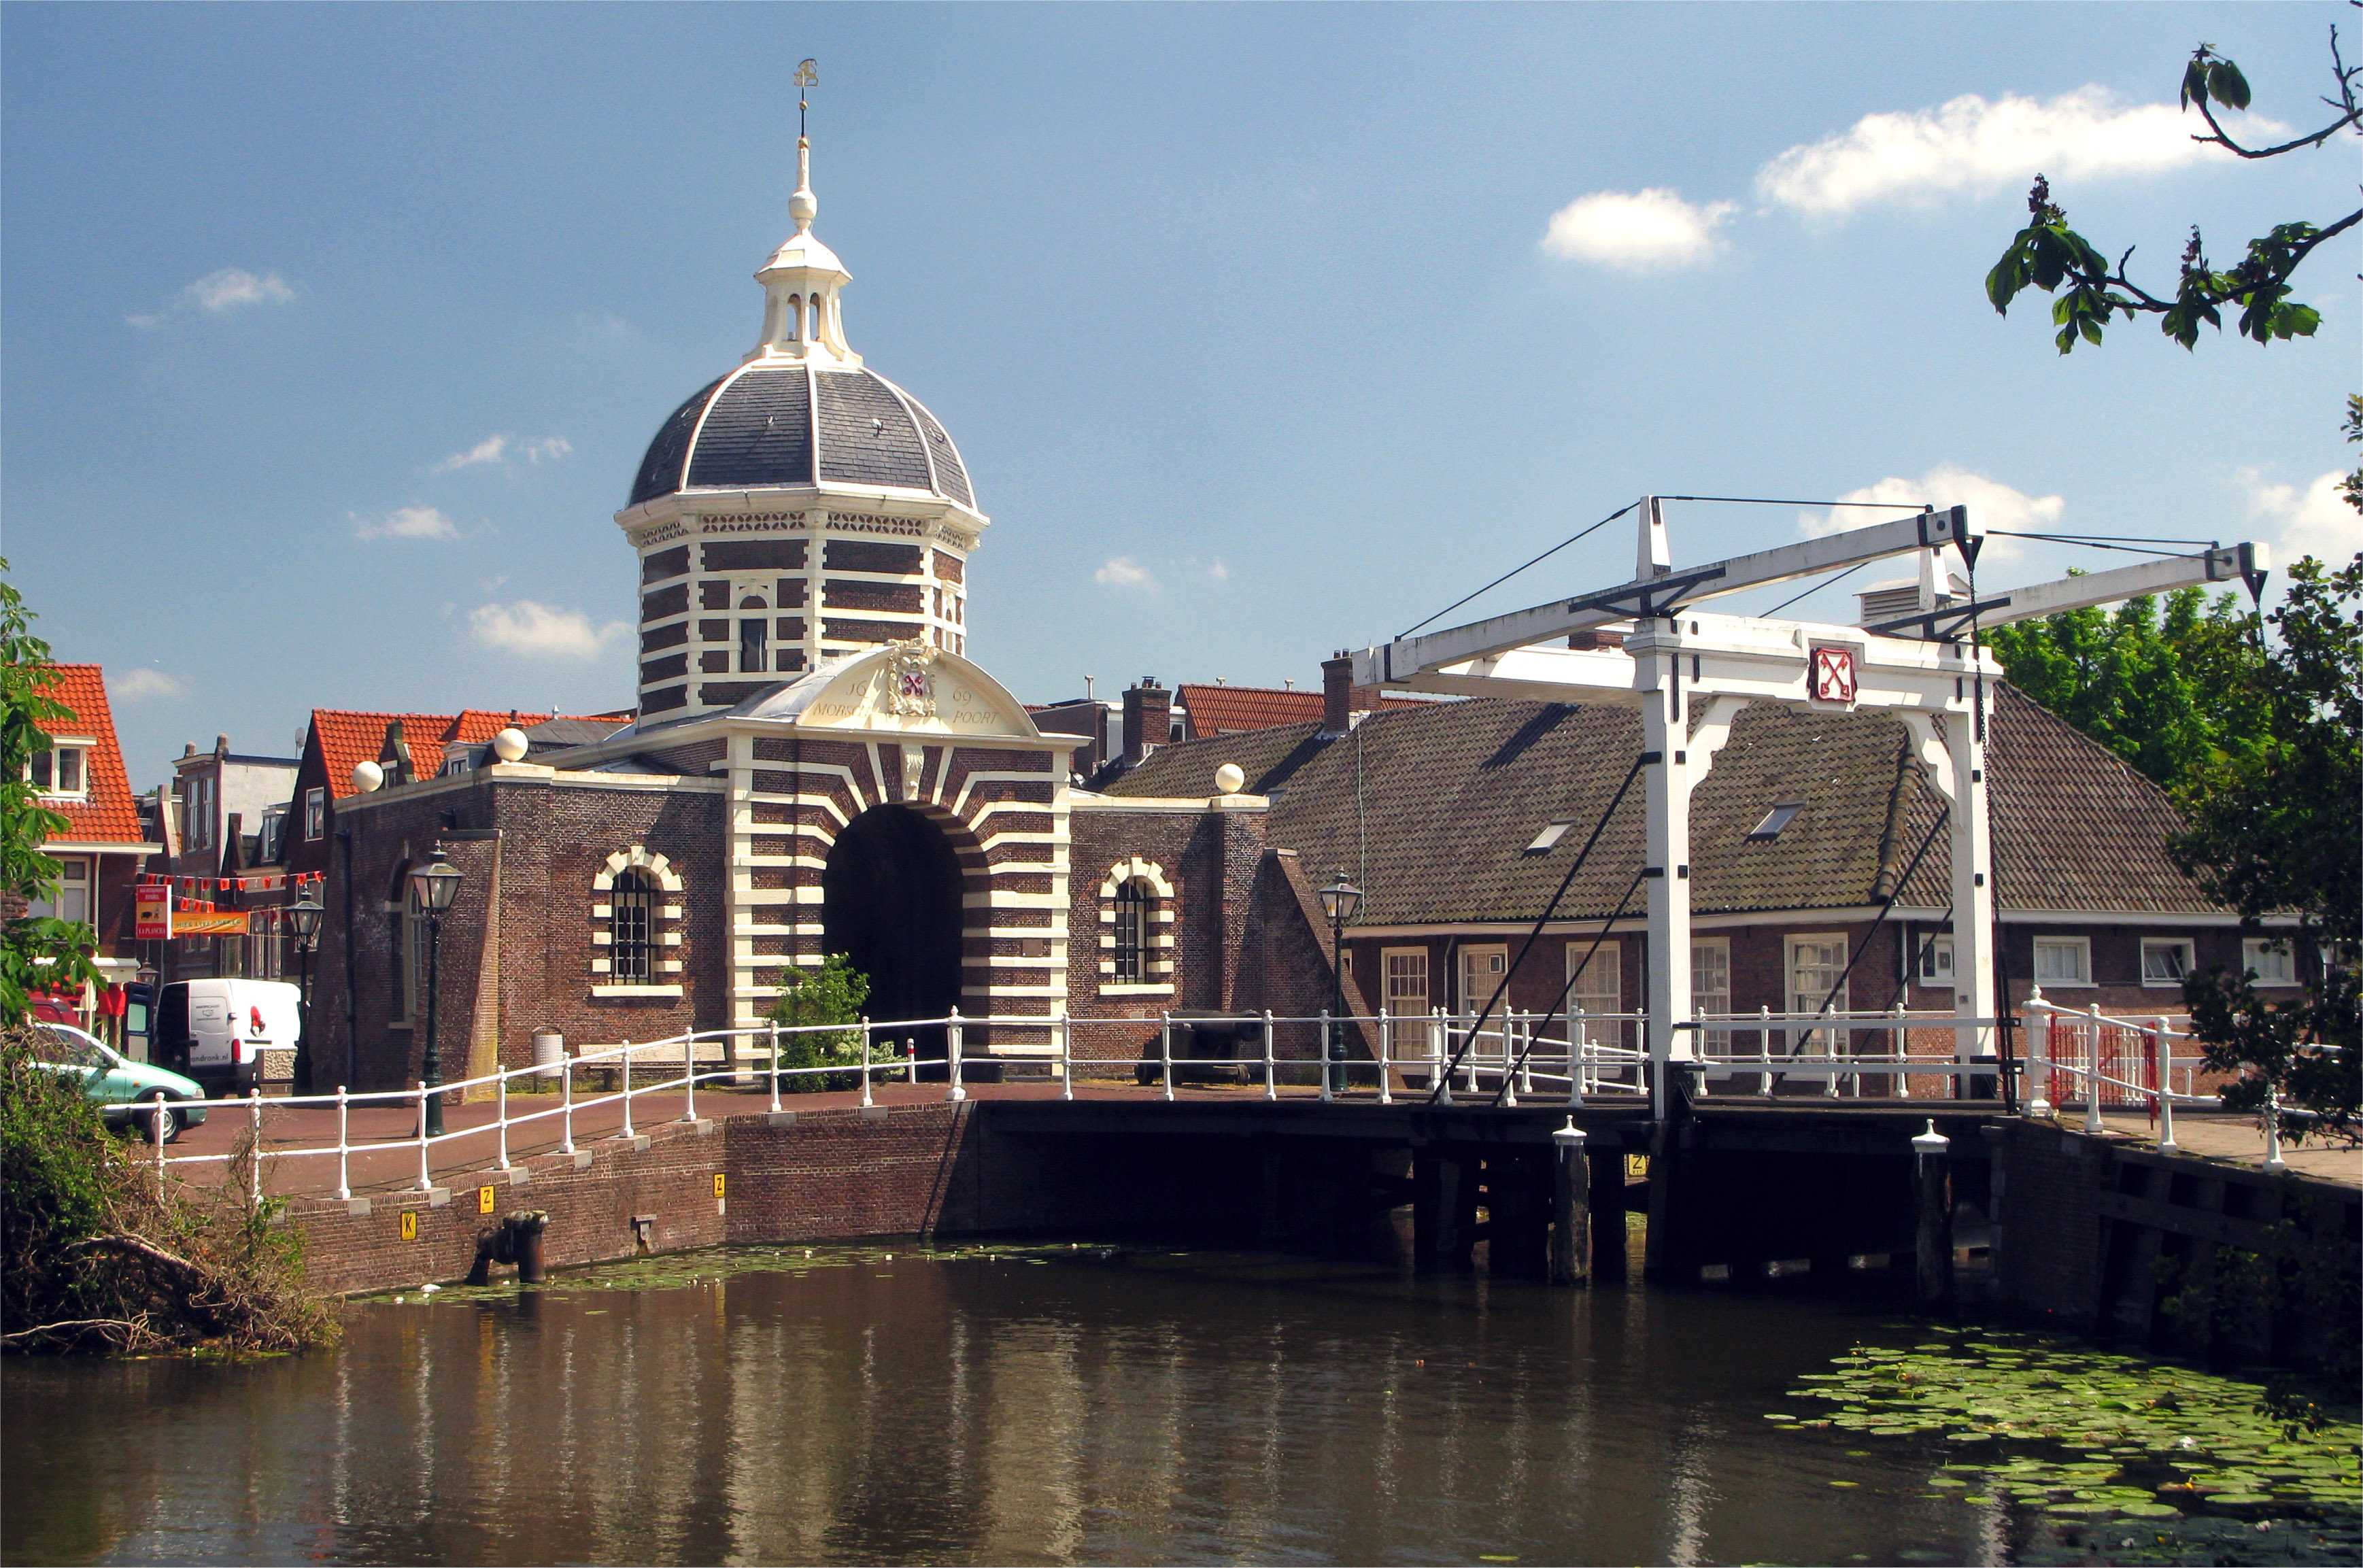 Interesting 11 night 12 day itinerary to Amsterdam, Leiden, Hague, Rotterdam and Delft